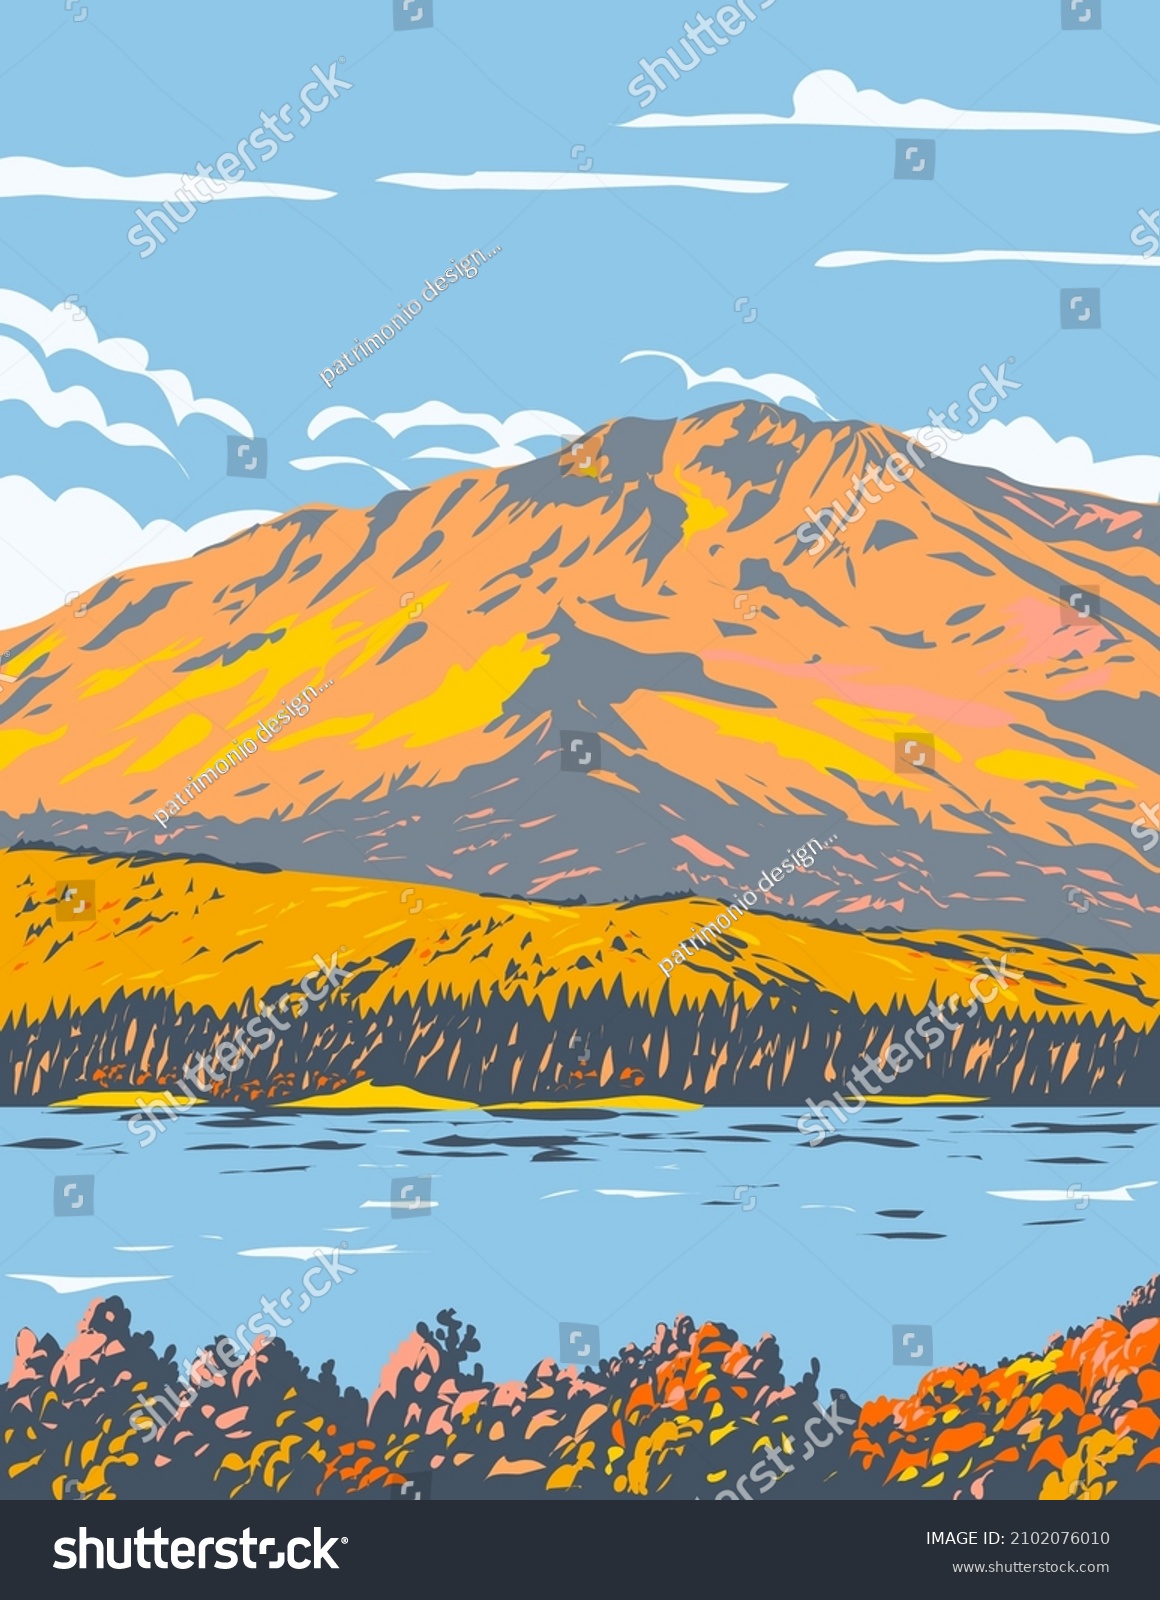 SVG of WPA poster art of Fallen Leaf Lake during fall in El Dorado County, California near California Nevada state border south west of Lake Tahoe, United States done in works project administration style. svg